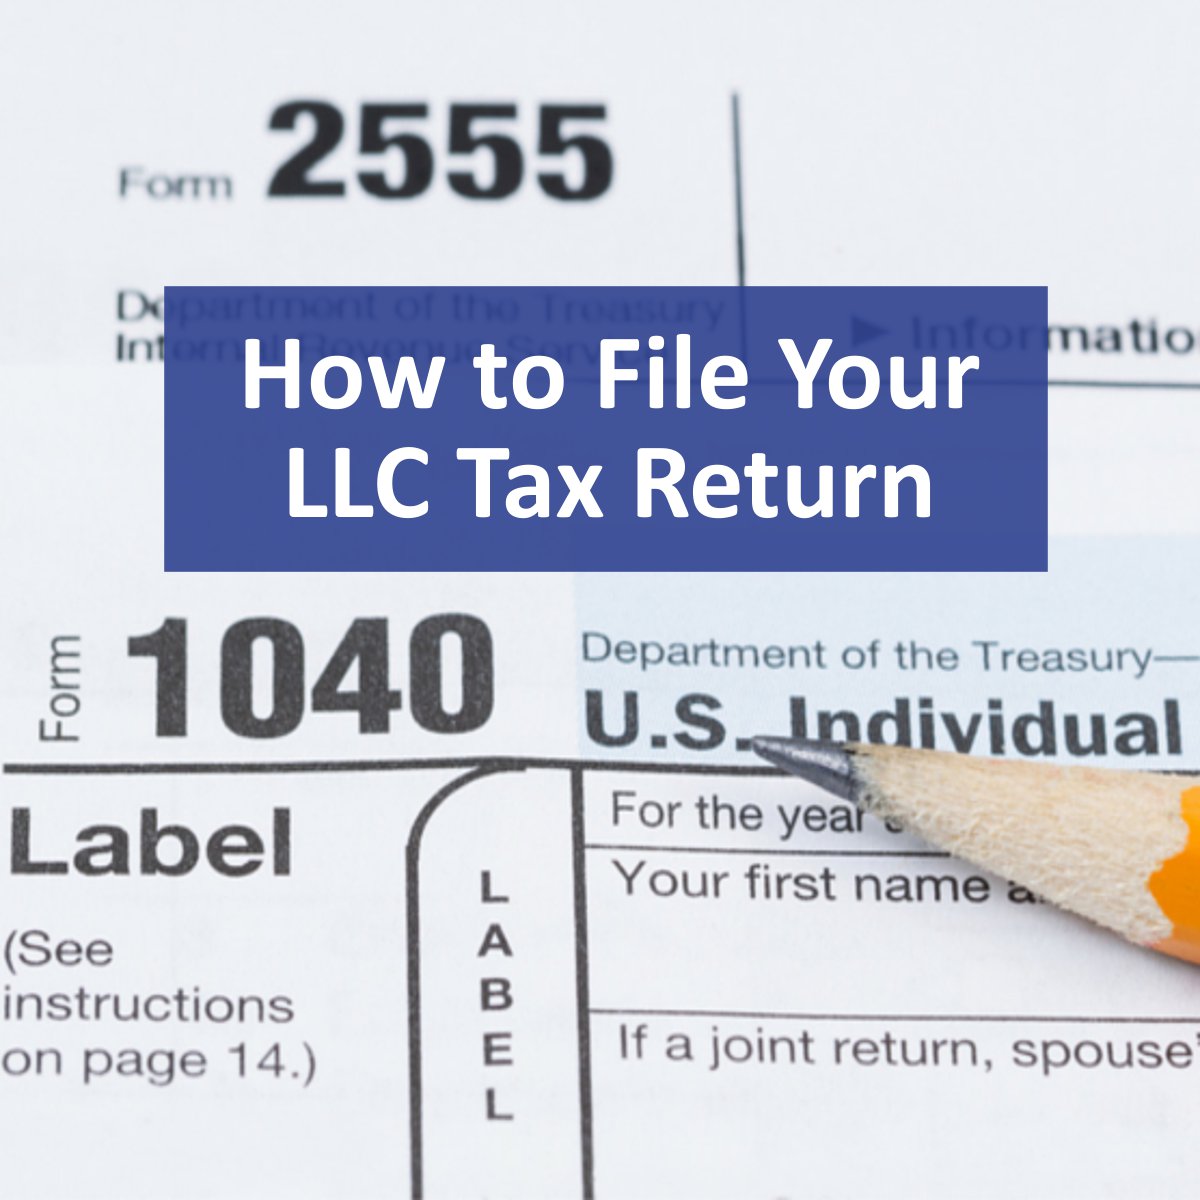 How to File Your LLC Tax Return